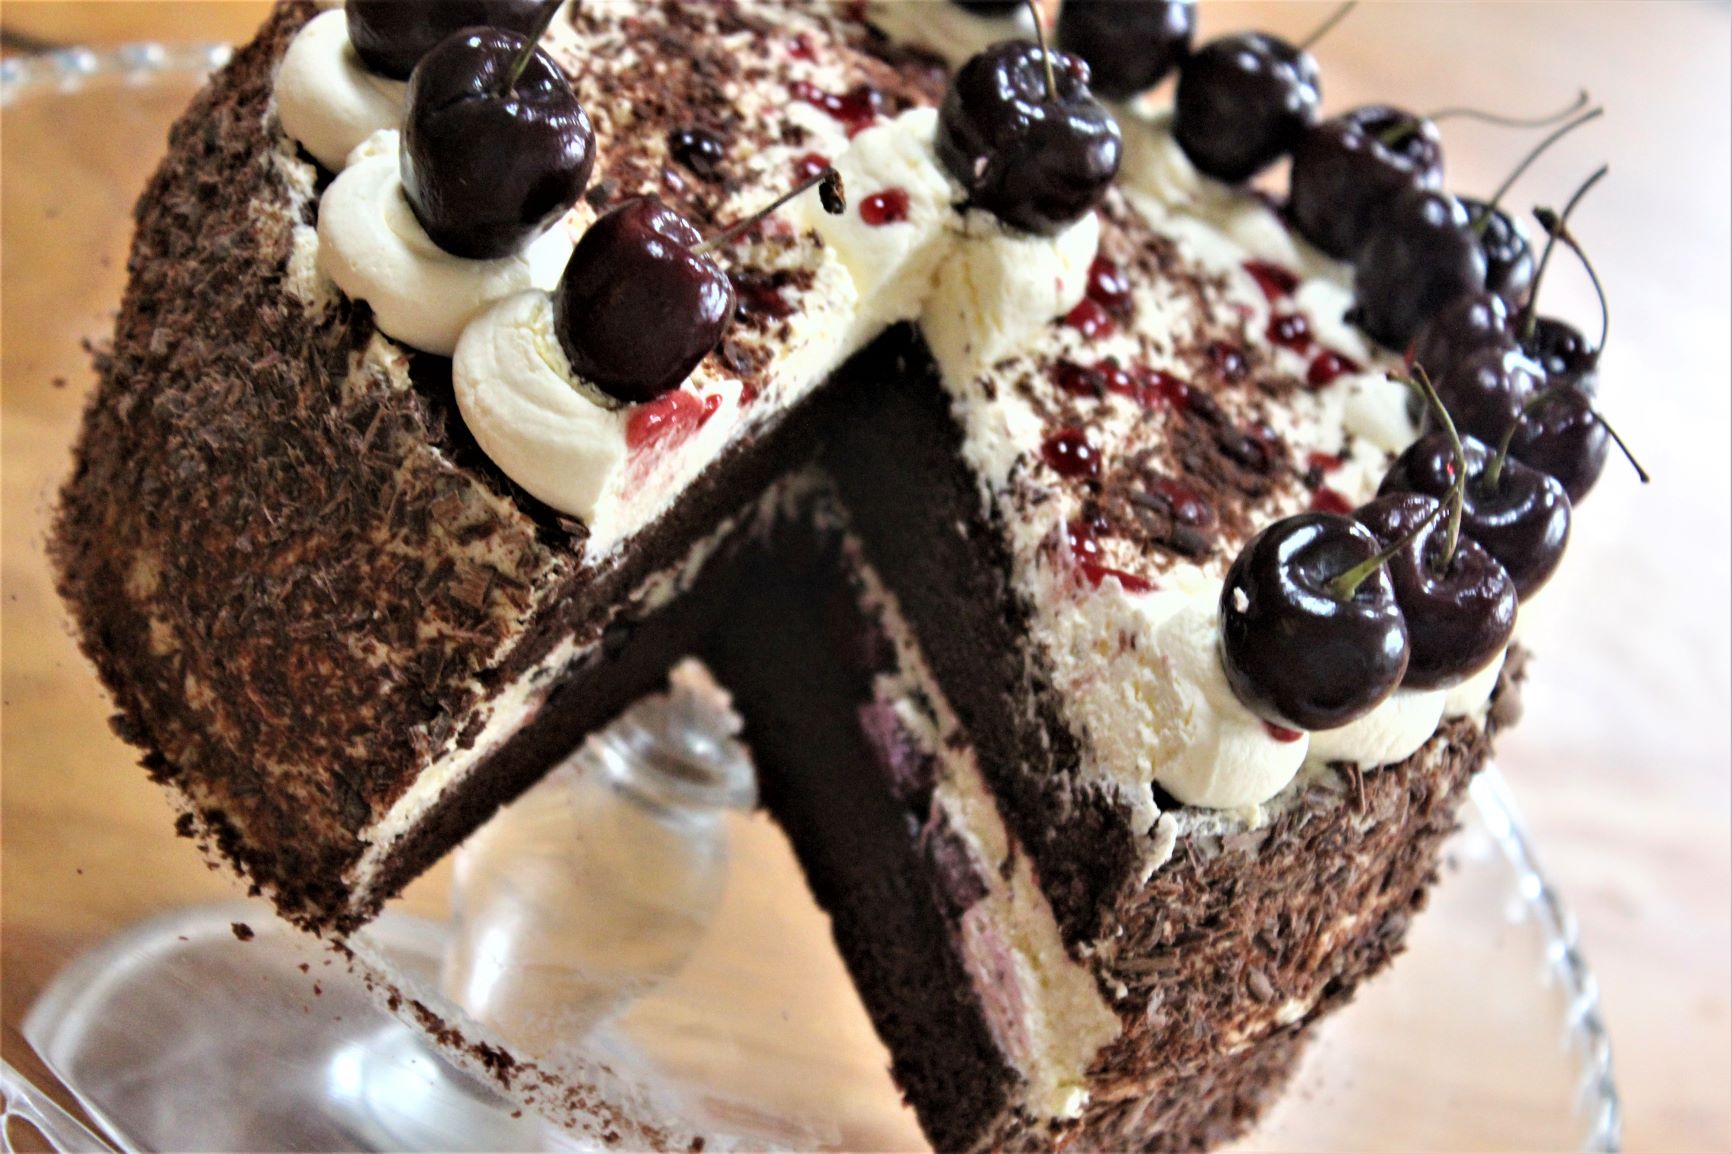 You are currently viewing RECIPE: GLUTEN-FREE BLACK FOREST GATEAU